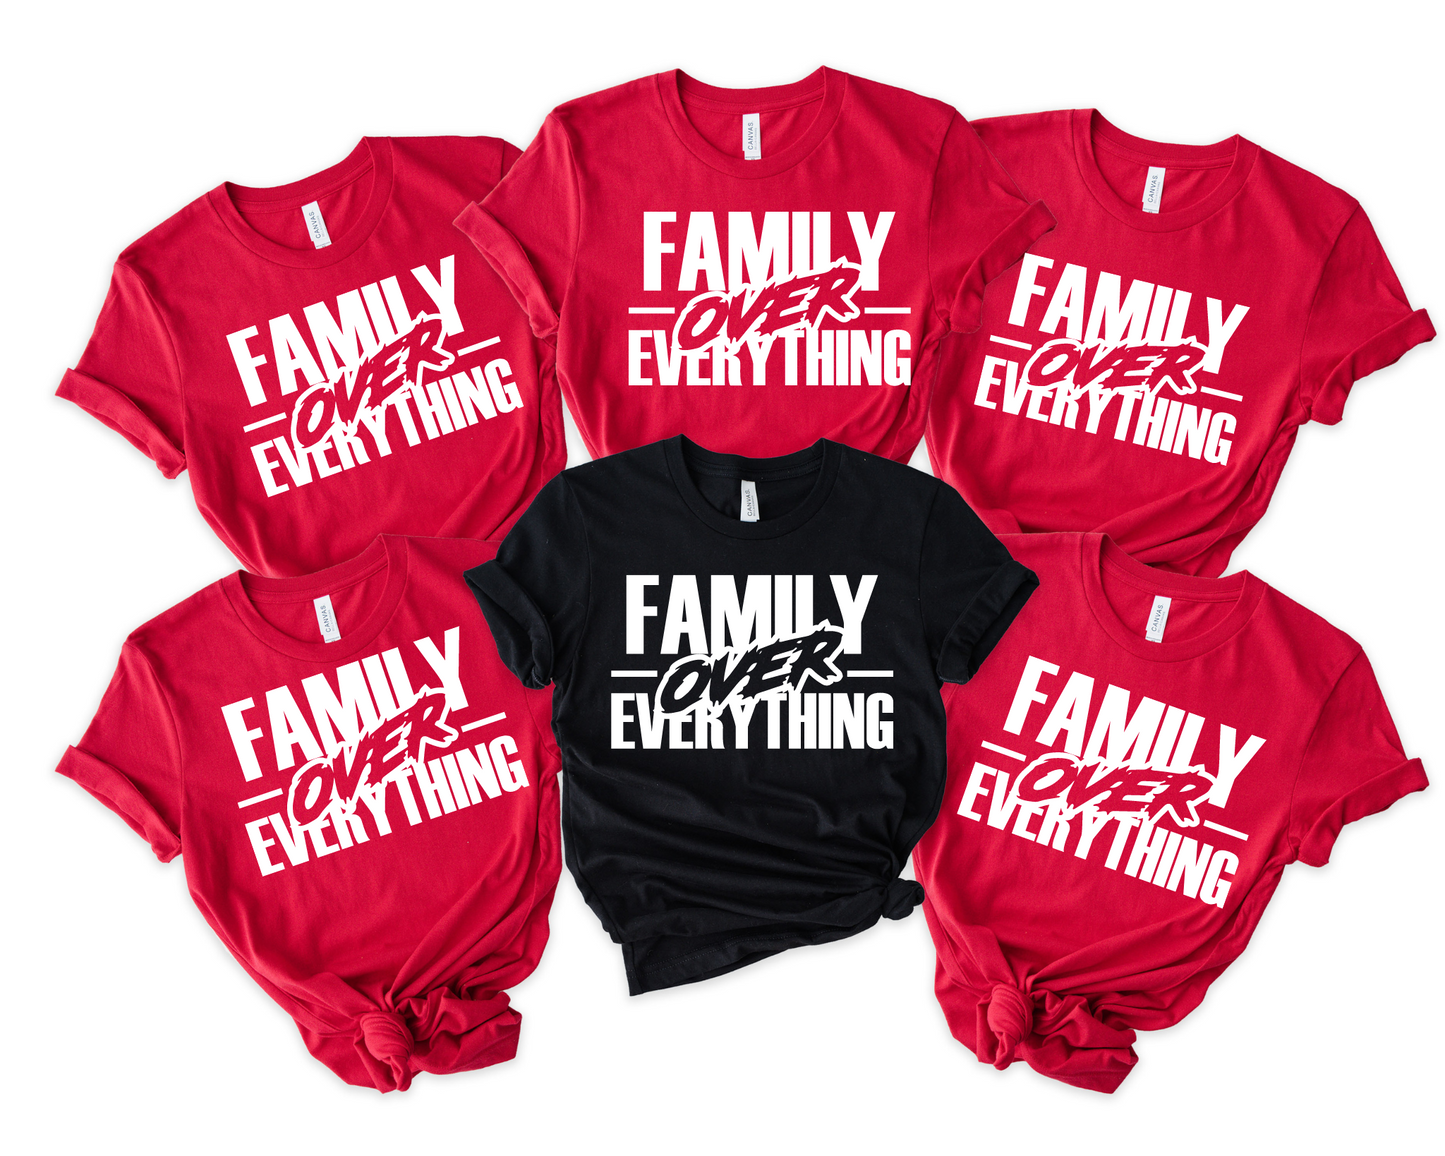 Family Over Everything Shirt, Family BBQ, Reunion, Travel Shirt, Group Family Shirt (ADULTS)